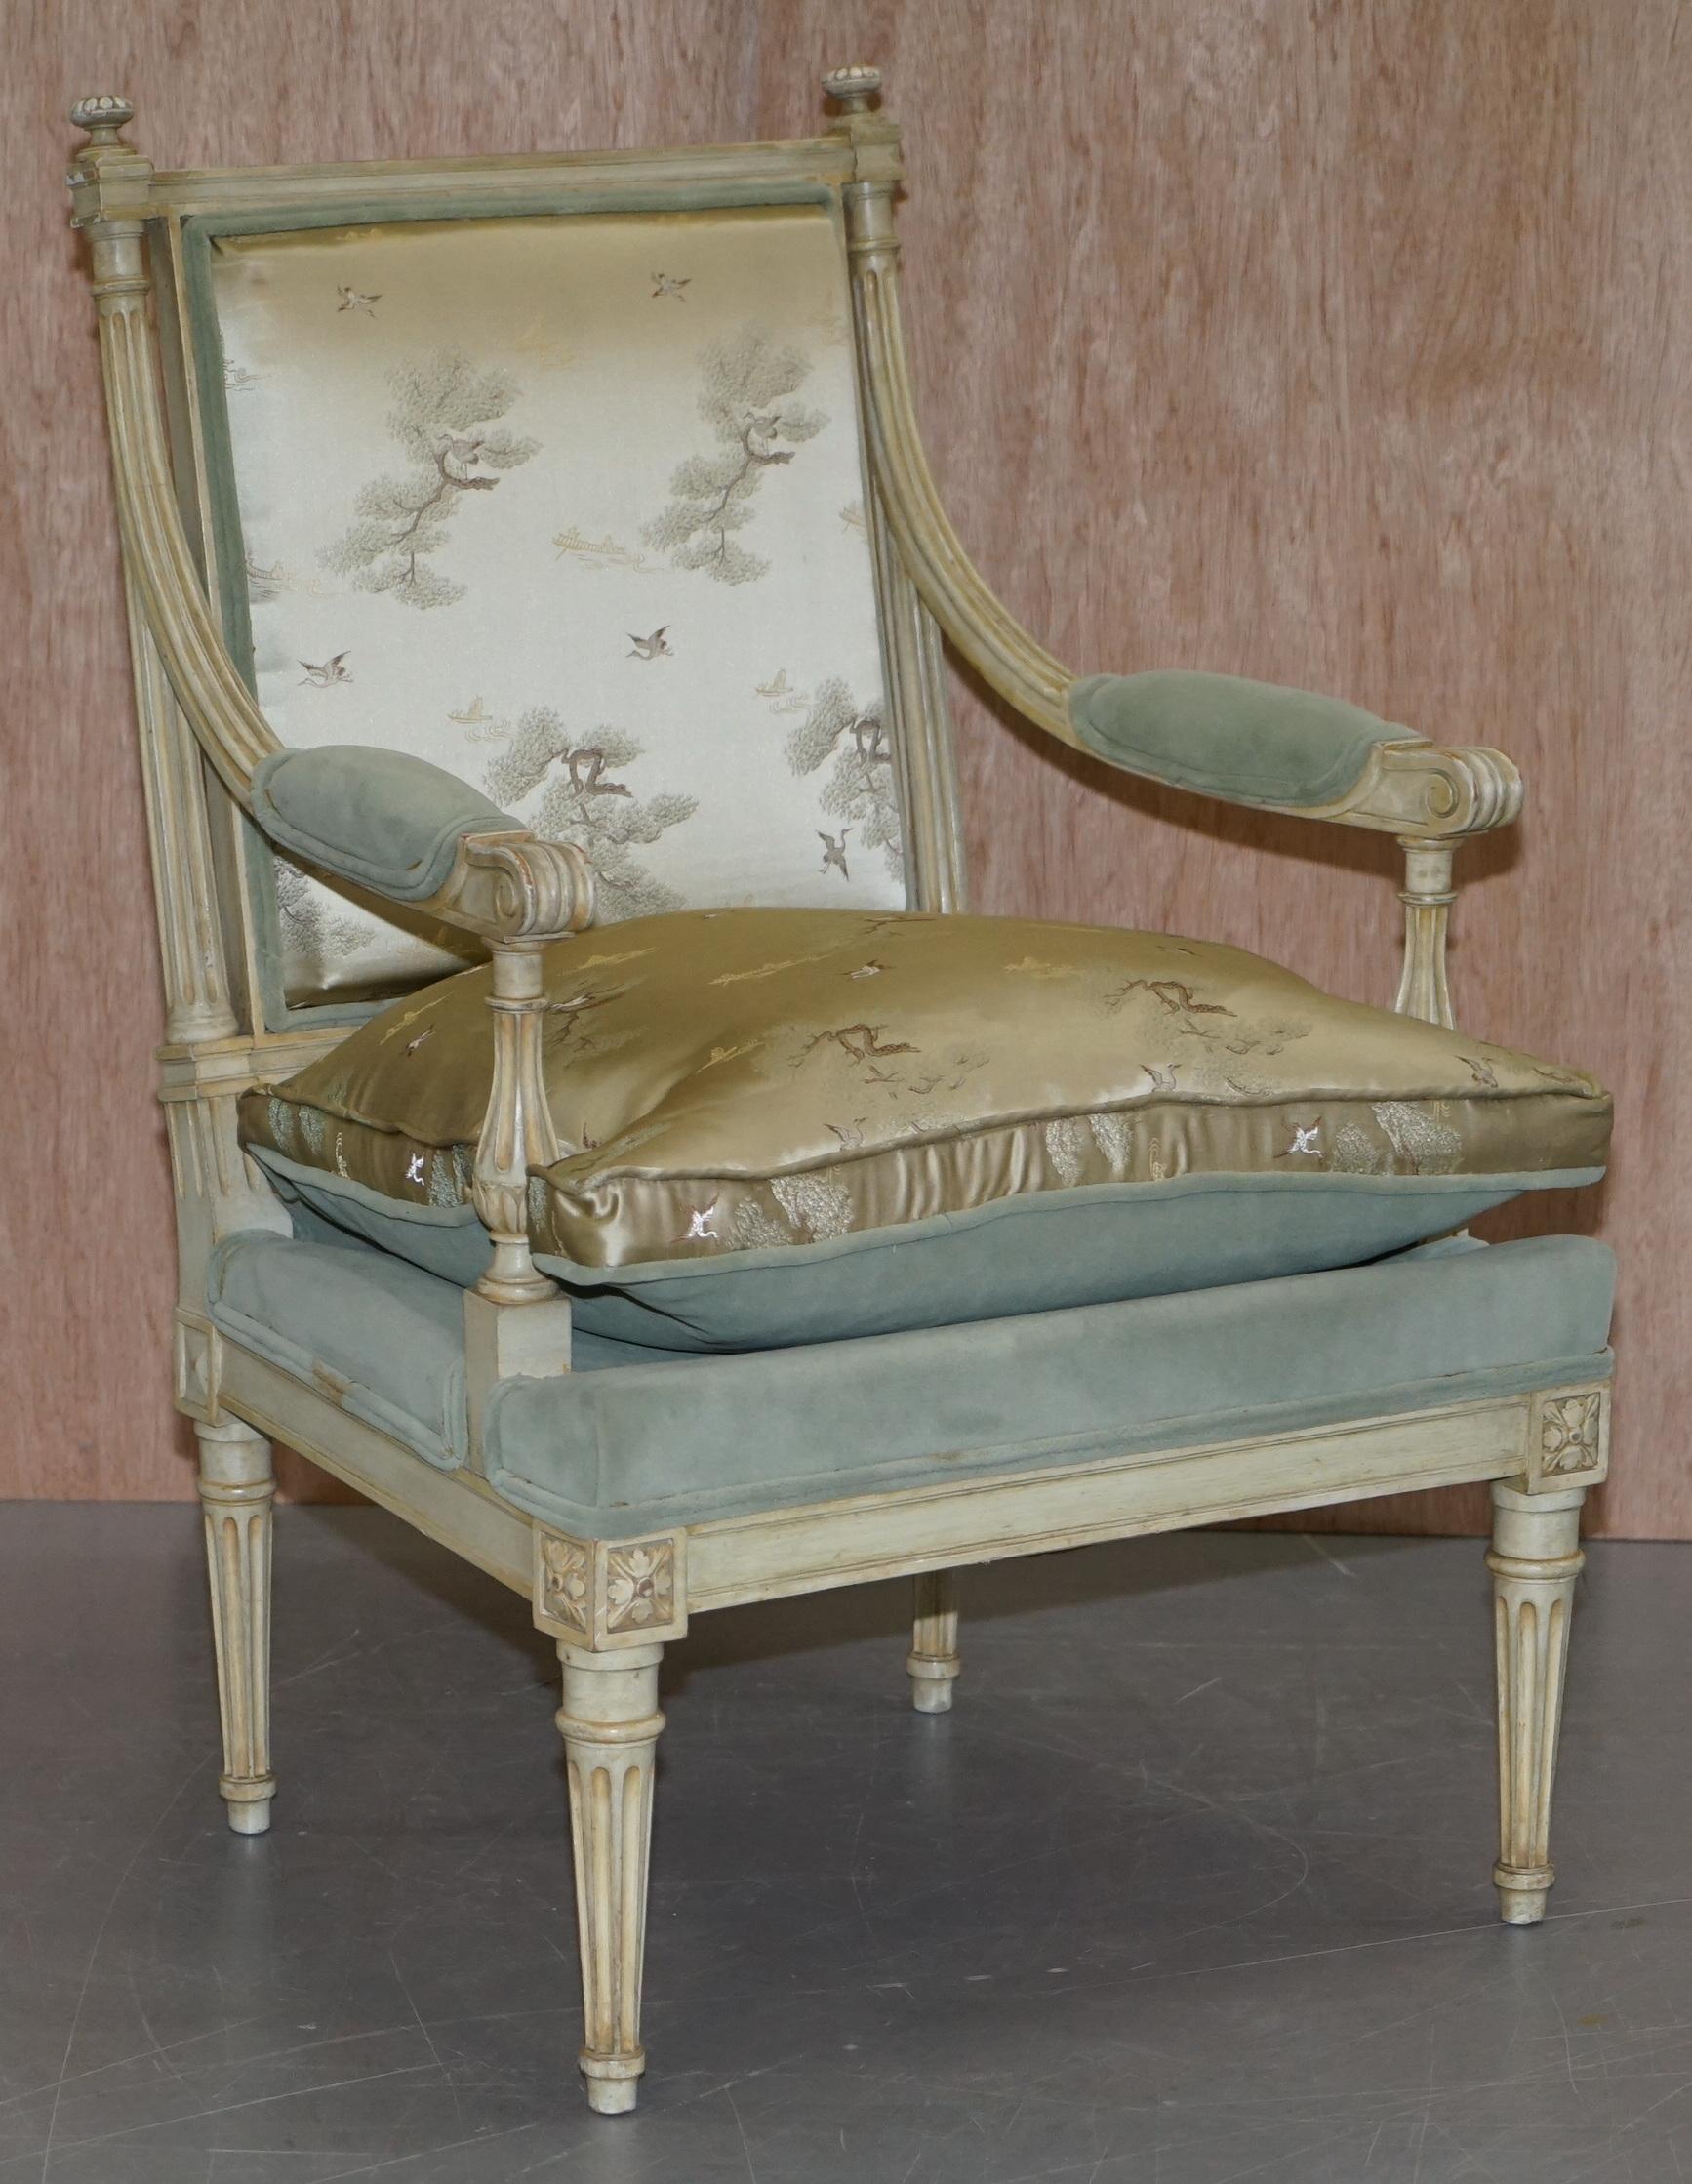 We are delighted to offer for sale this stunning pair of restored circa 1900 hand painted French armchairs with new Chinese silk upholstery

An absolutely stunning pair of inspirational chairs. The frames are original, the bases coil sprung and